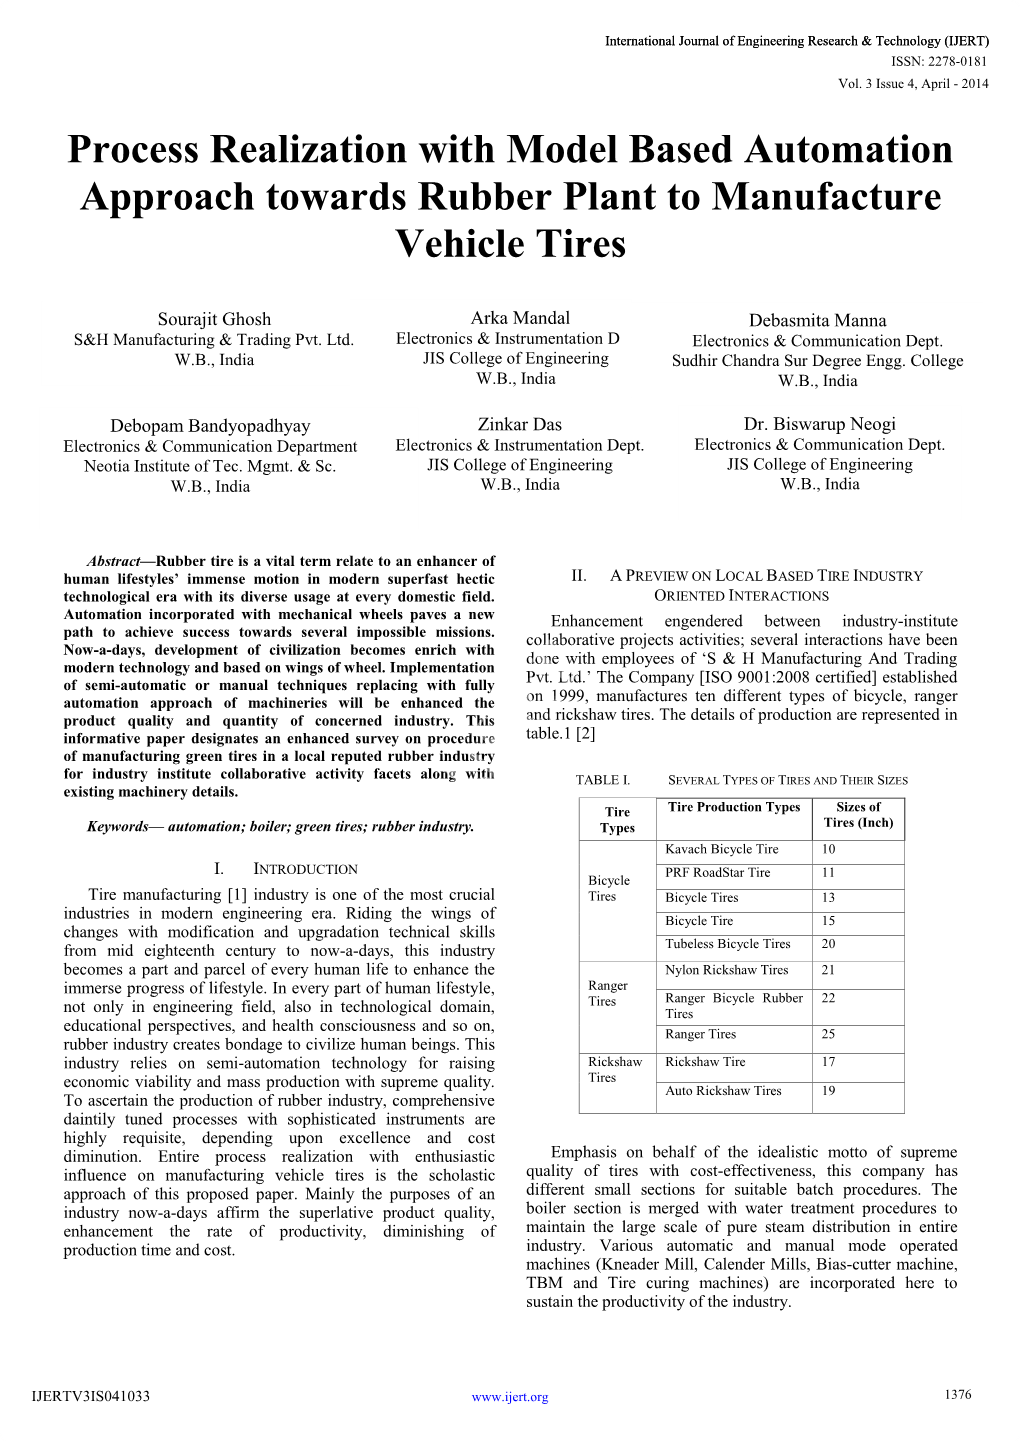 Process Realization with Model Based Automation Approach Towards Rubber Plant to Manufacture Vehicle Tires